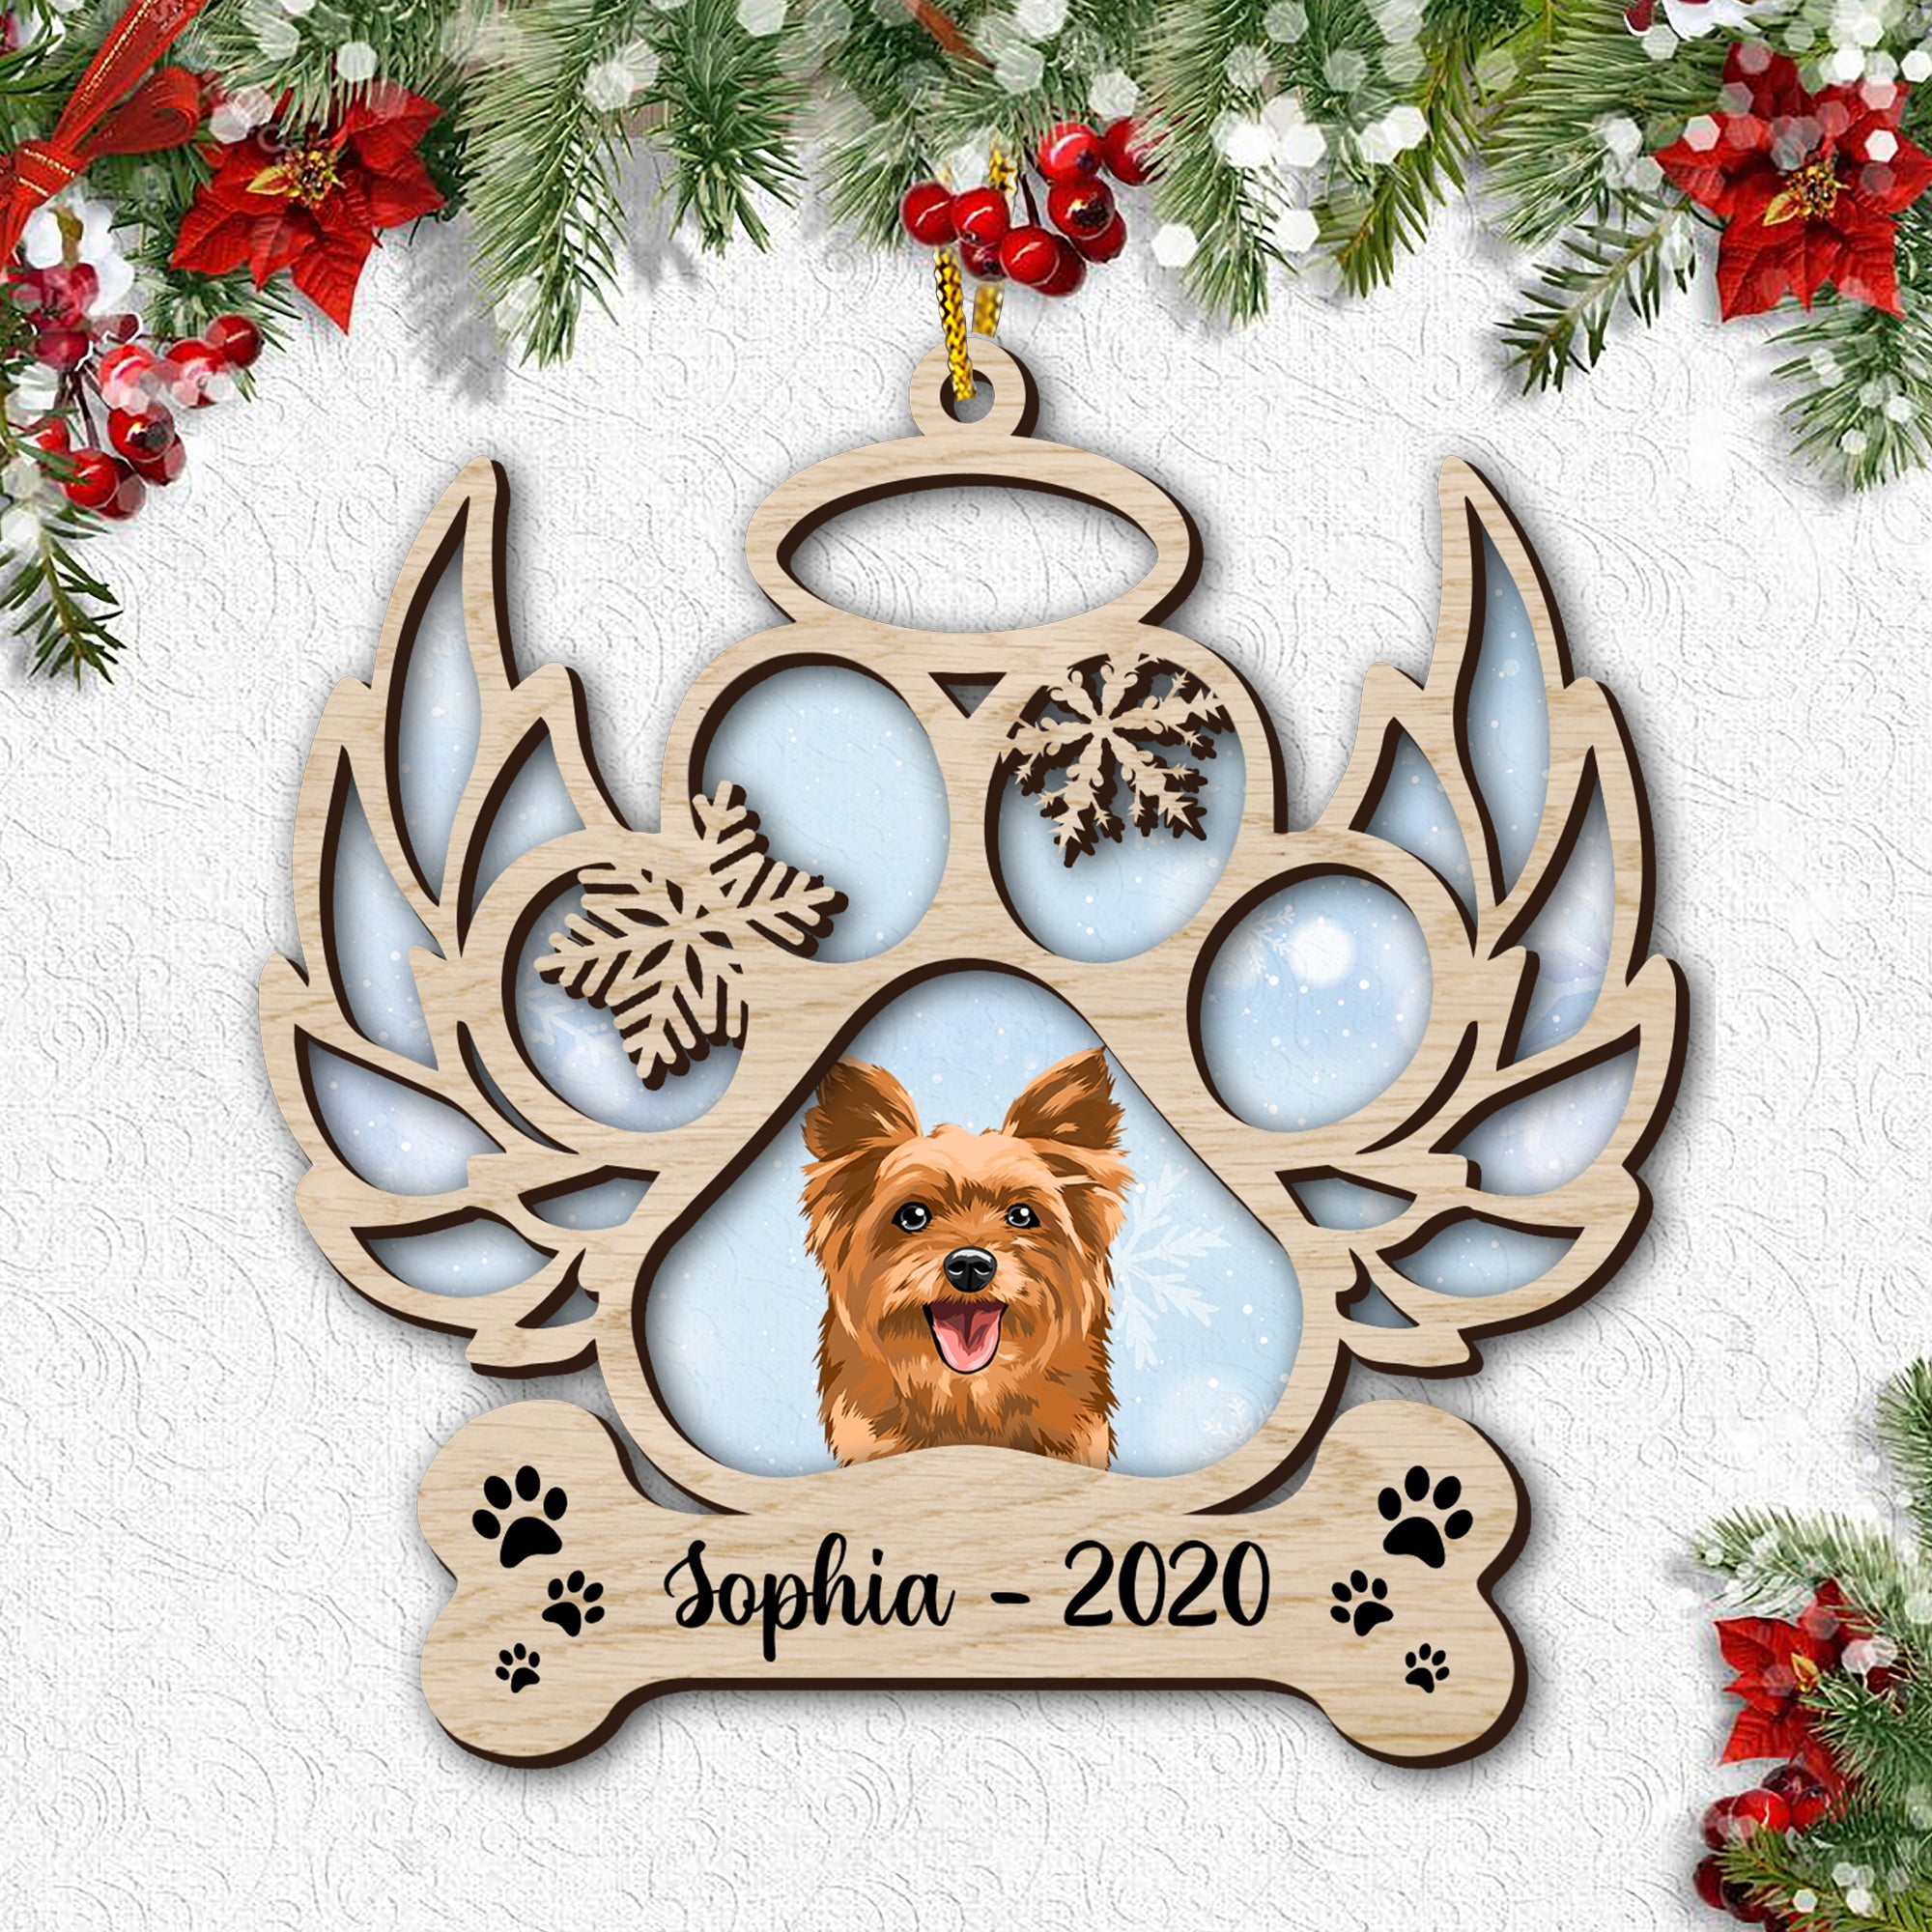 Memorial Dog Paw With Wings Ornament - Custom Shape Wood and Acrylic Ornament